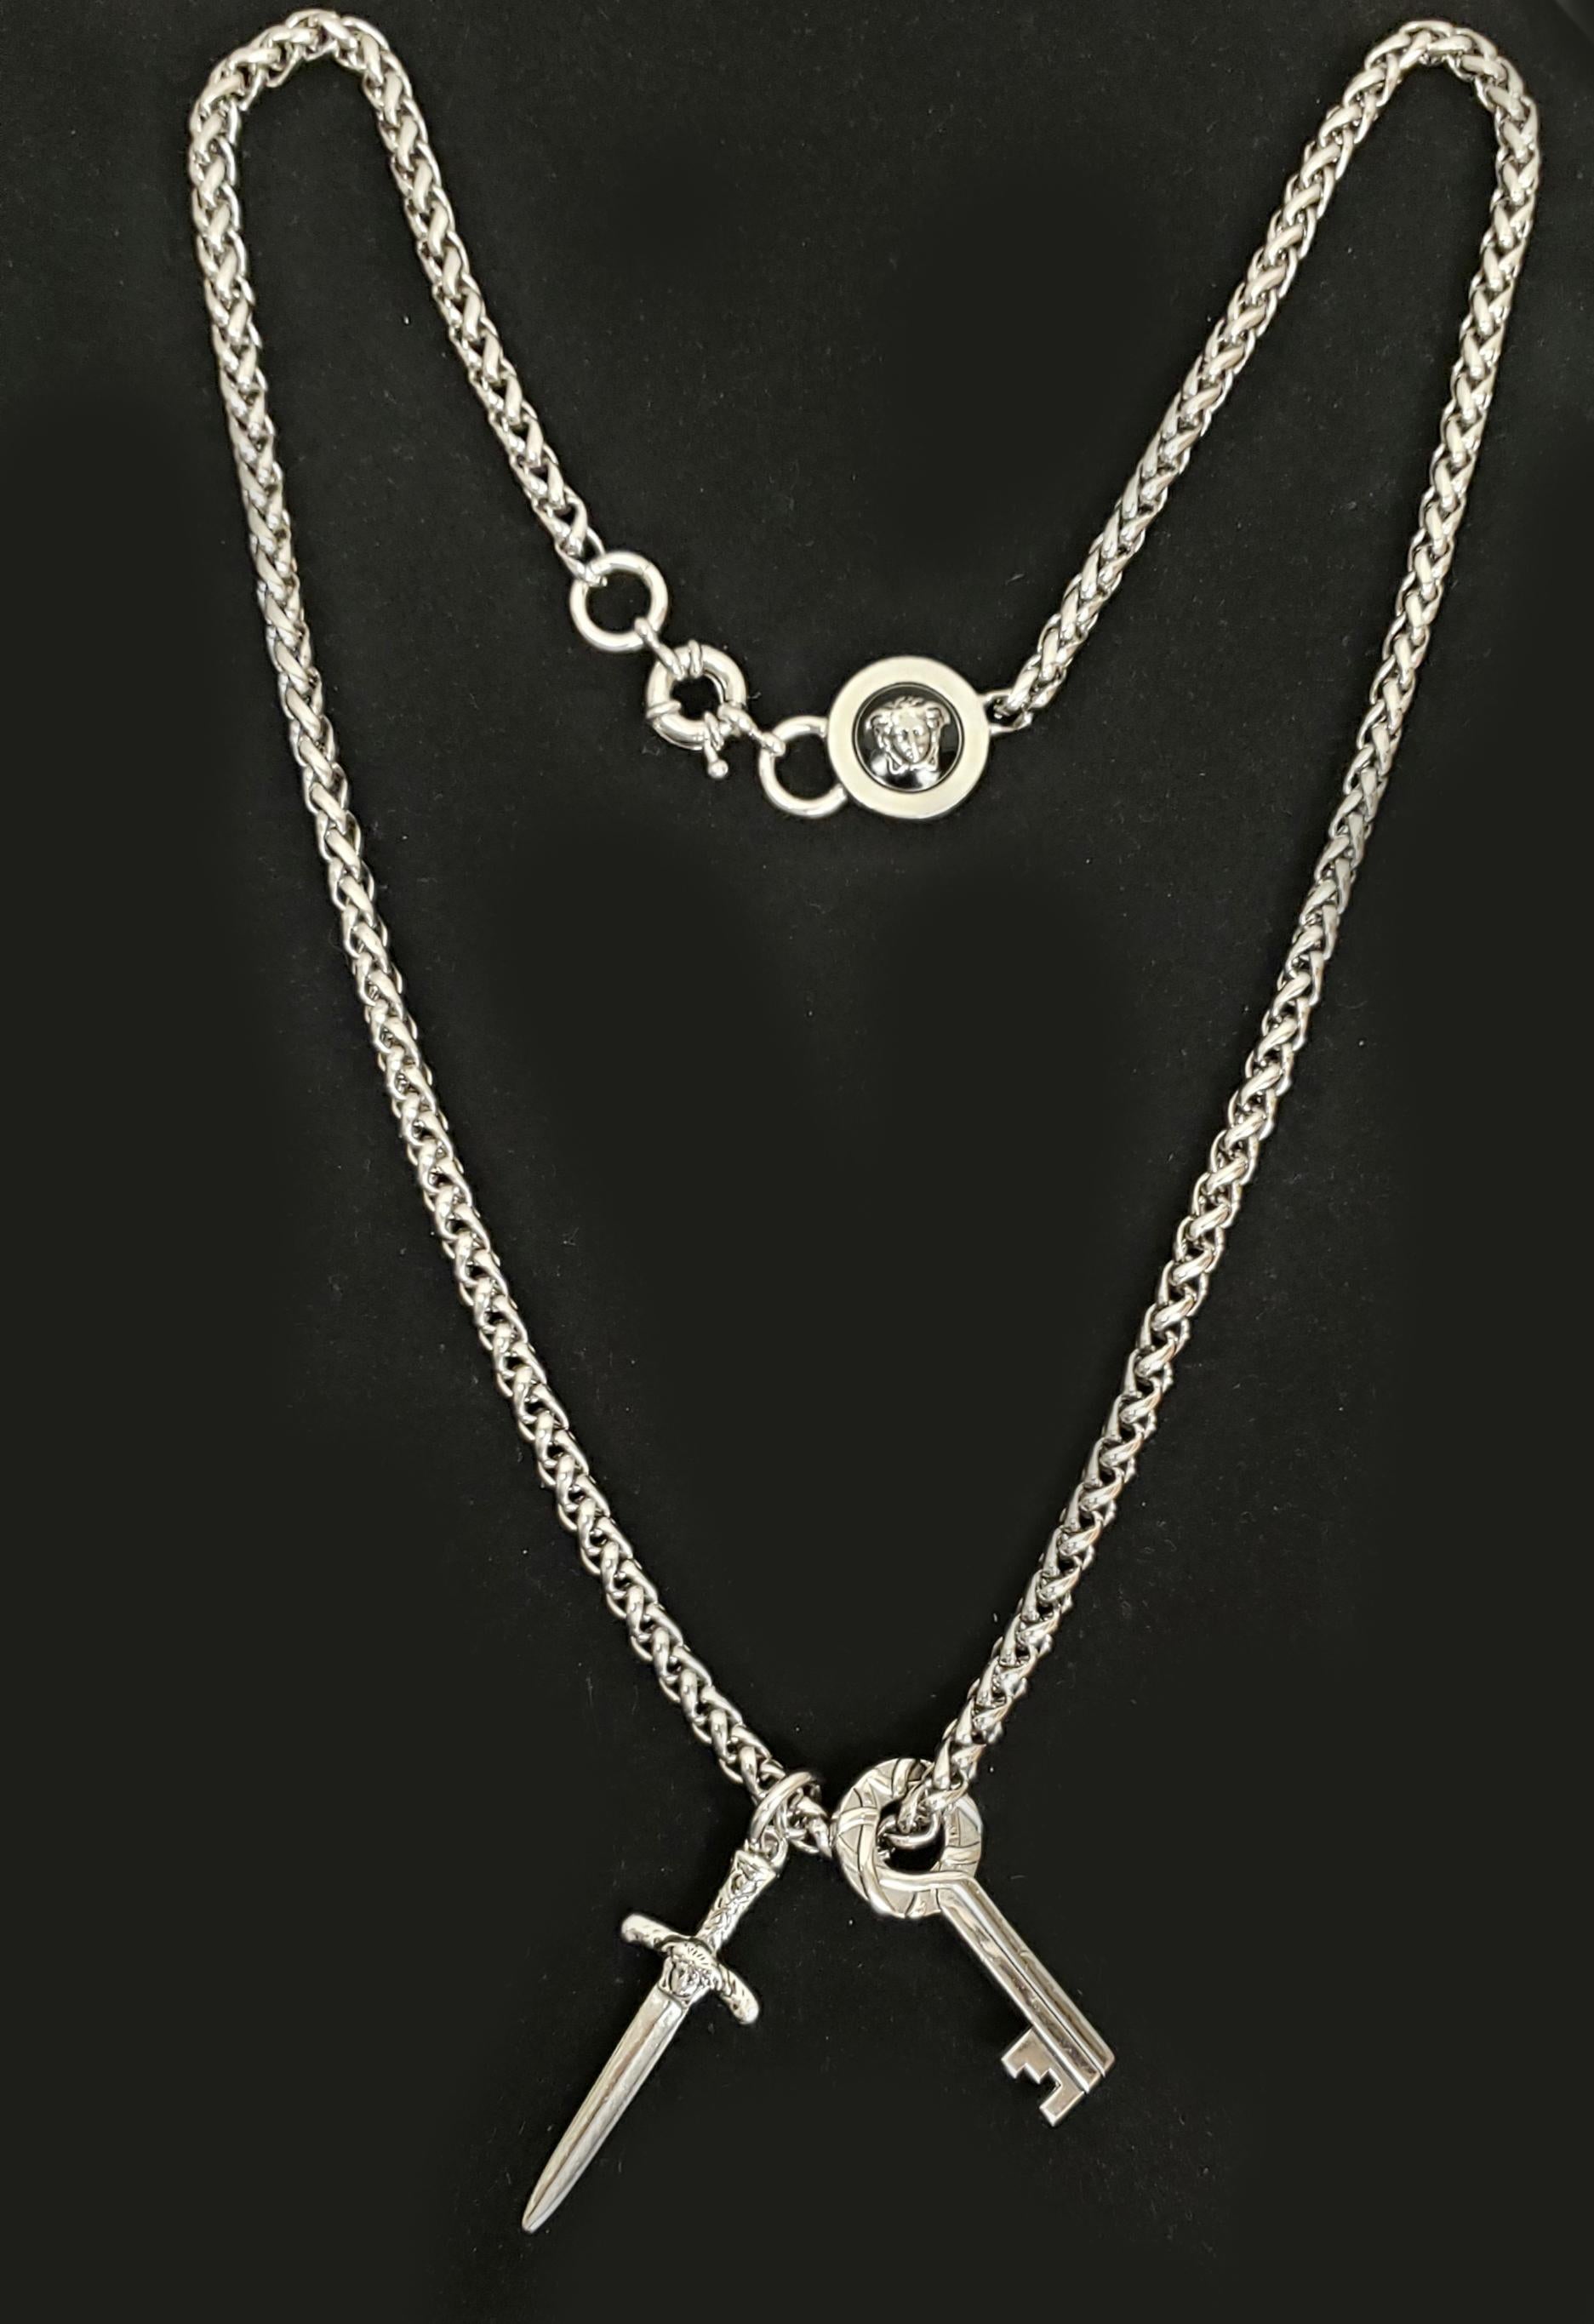 Spring 2011 L# 43 NEW VERSACE SILVER TONE KEY and DAGGER METAL CHAIN 2